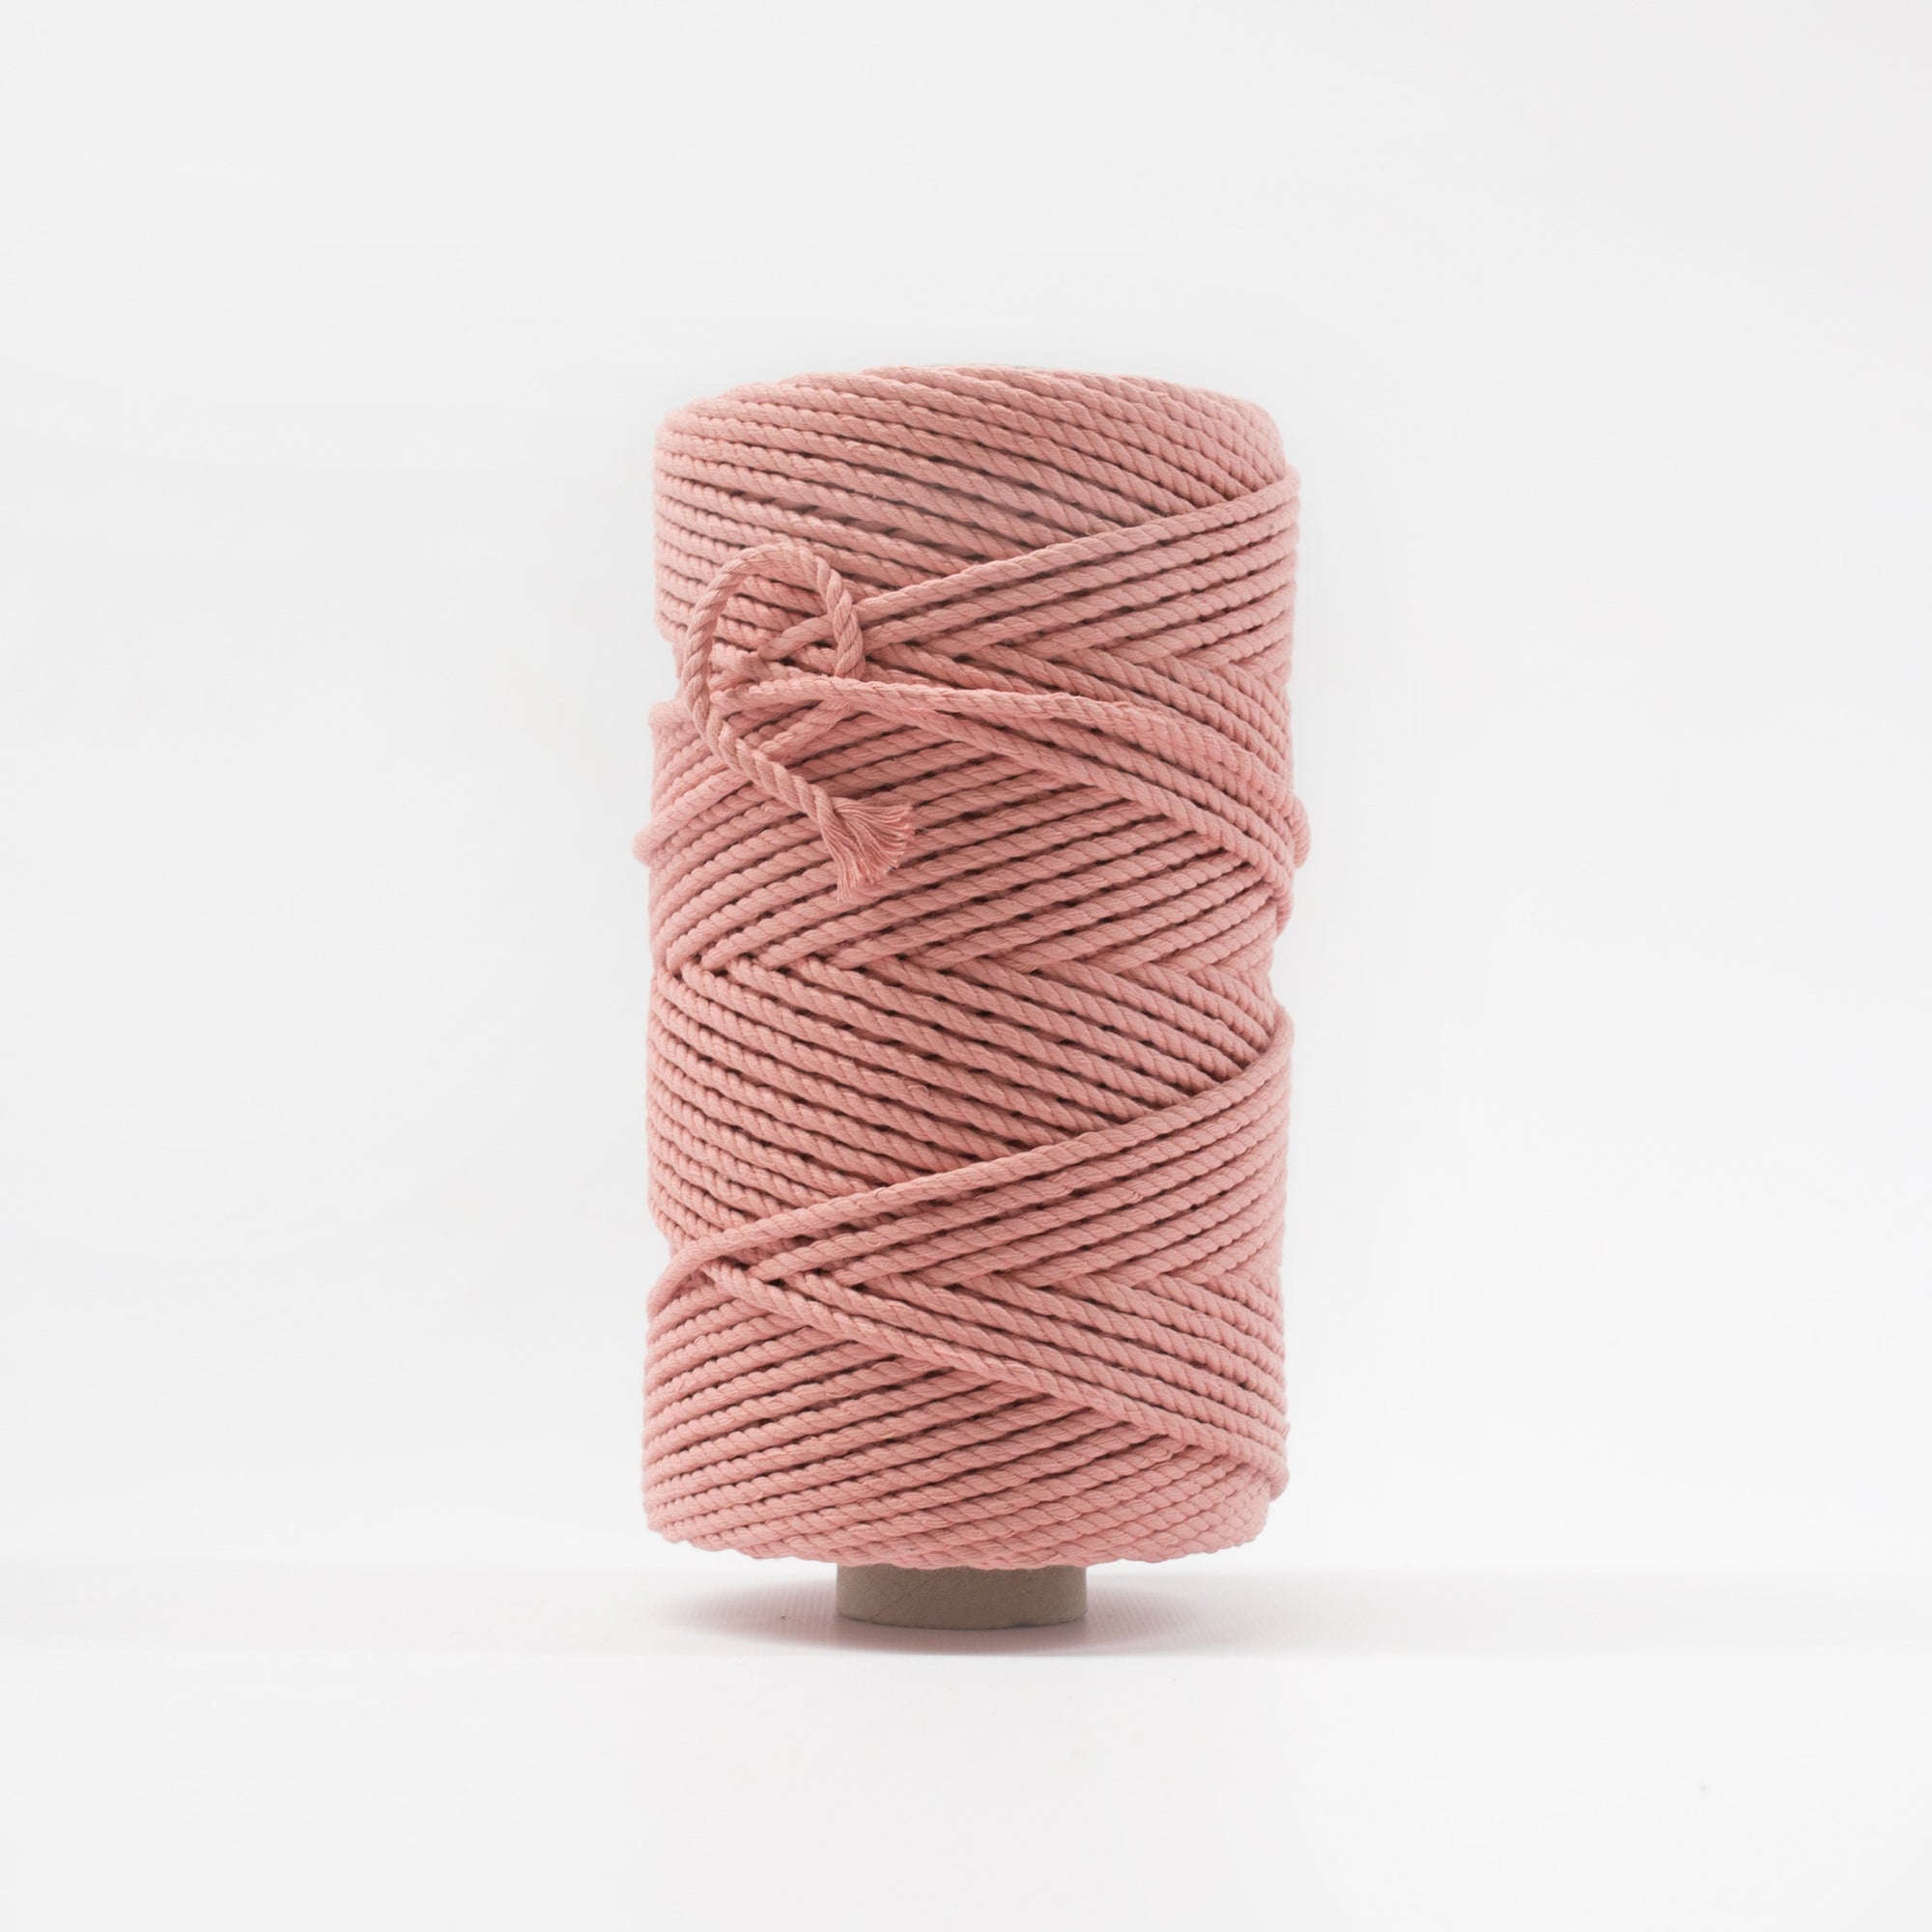 Mary Maker Studio Luxe Colour Cotton 4mm 1KG Recycled Luxe Macrame Rope // Coral macrame cotton macrame rope macrame workshop macrame patterns macrame